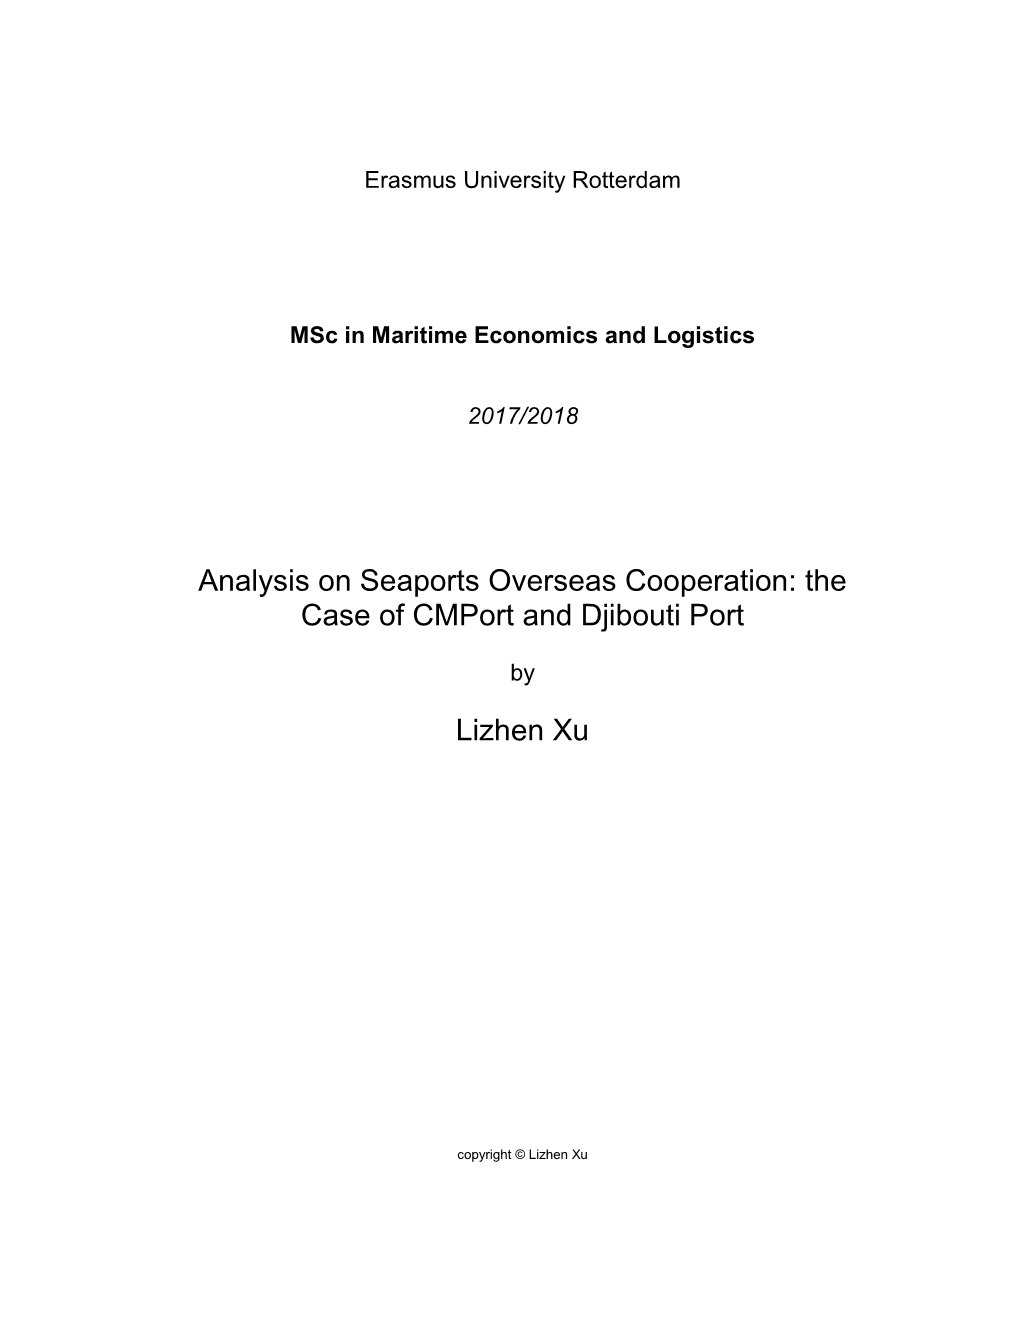 Analysis on Seaports Overseas Cooperation: the Case of Cmport and Djibouti Port Lizhen Xu